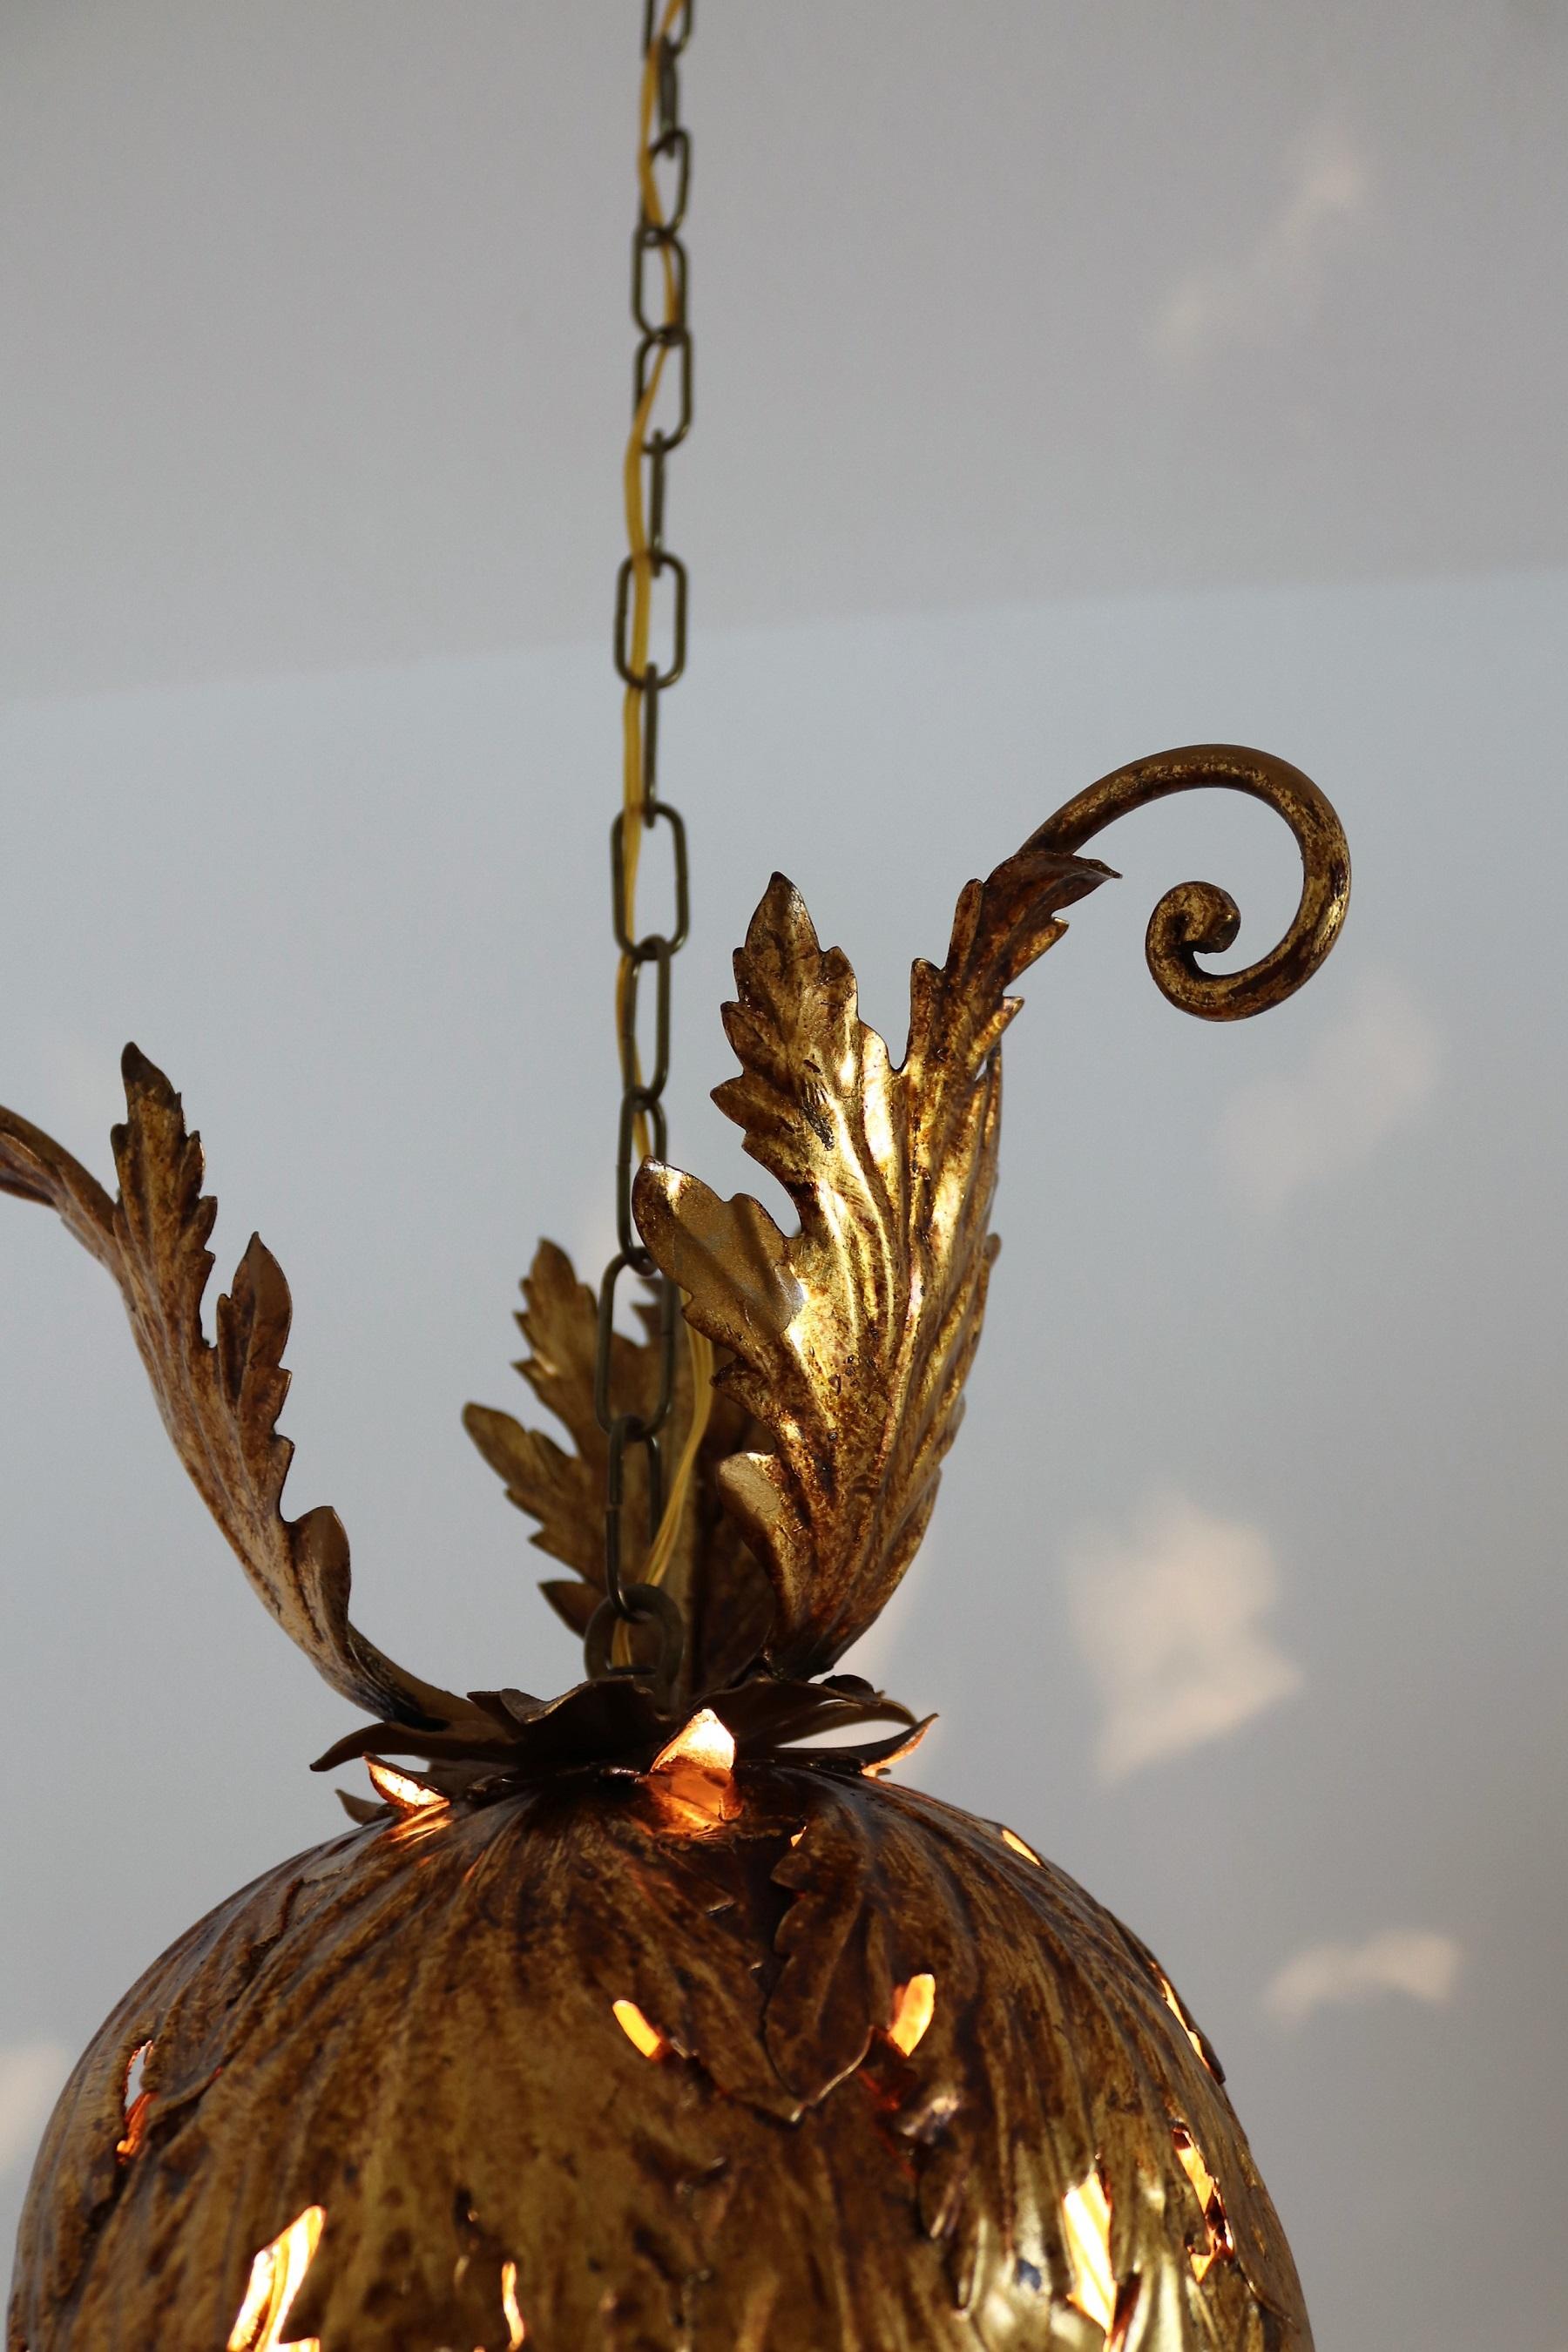 Italian Midcentury Gilt Metal Pendant Lamp with Leaves for Hans Kögl, 1960s For Sale 4